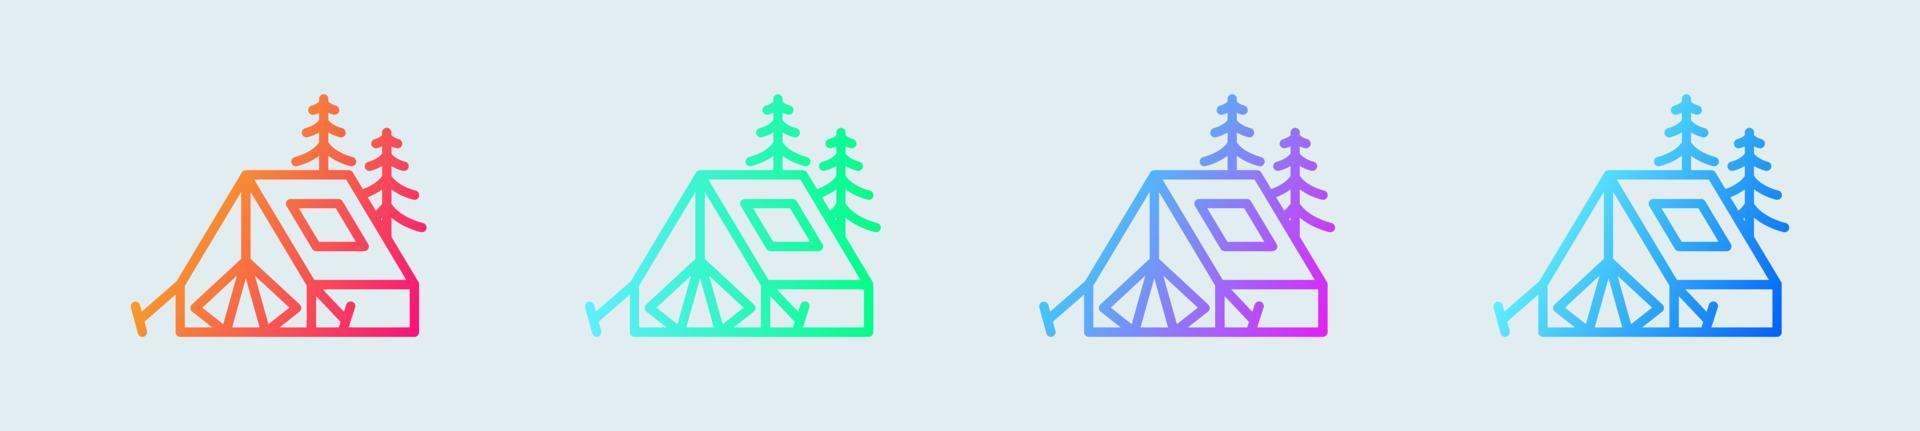 Tent line icon in gradient colors. Camping signs vector illustration.